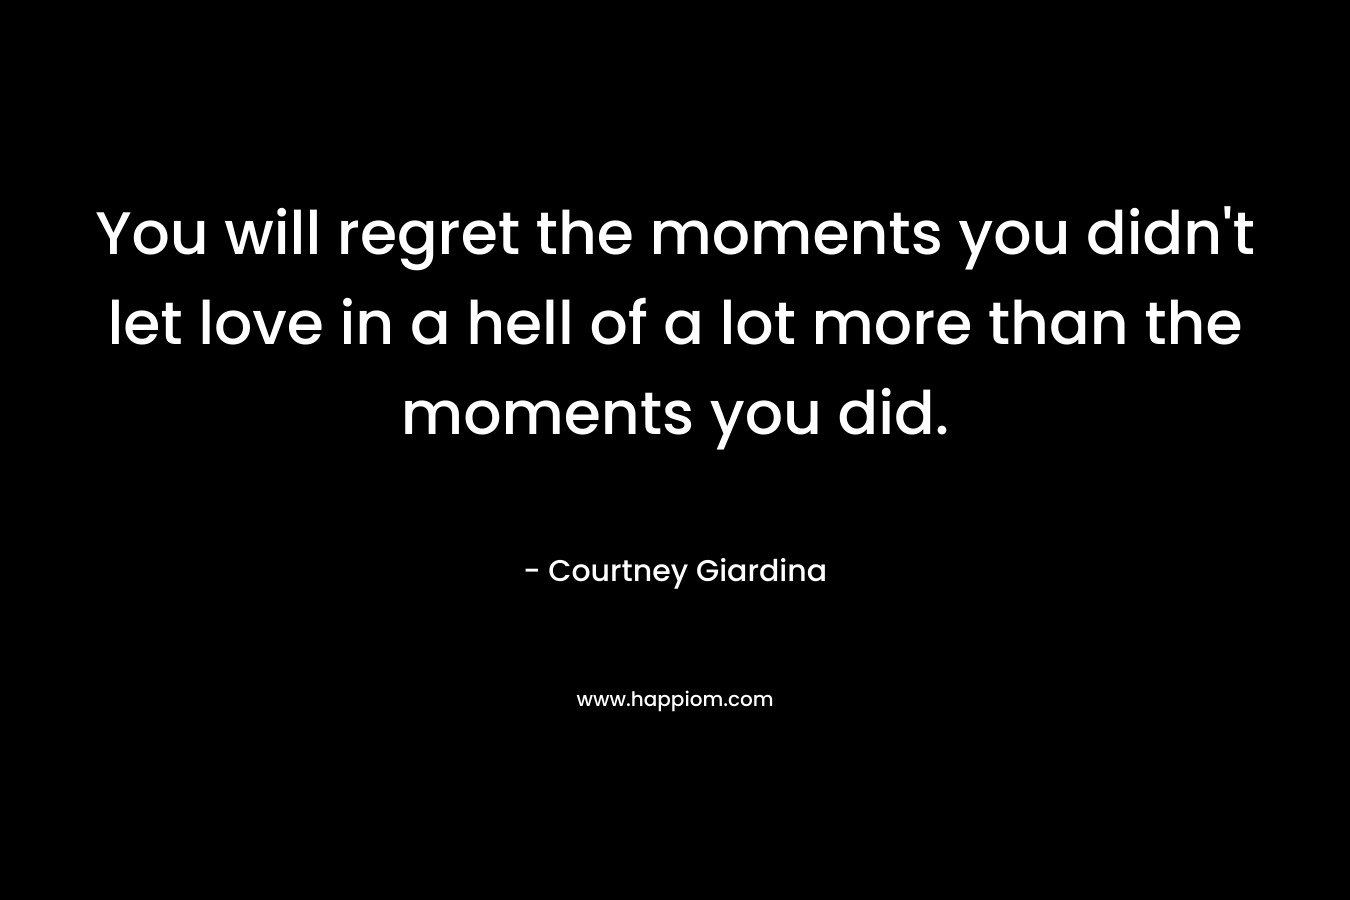 You will regret the moments you didn't let love in a hell of a lot more than the moments you did.